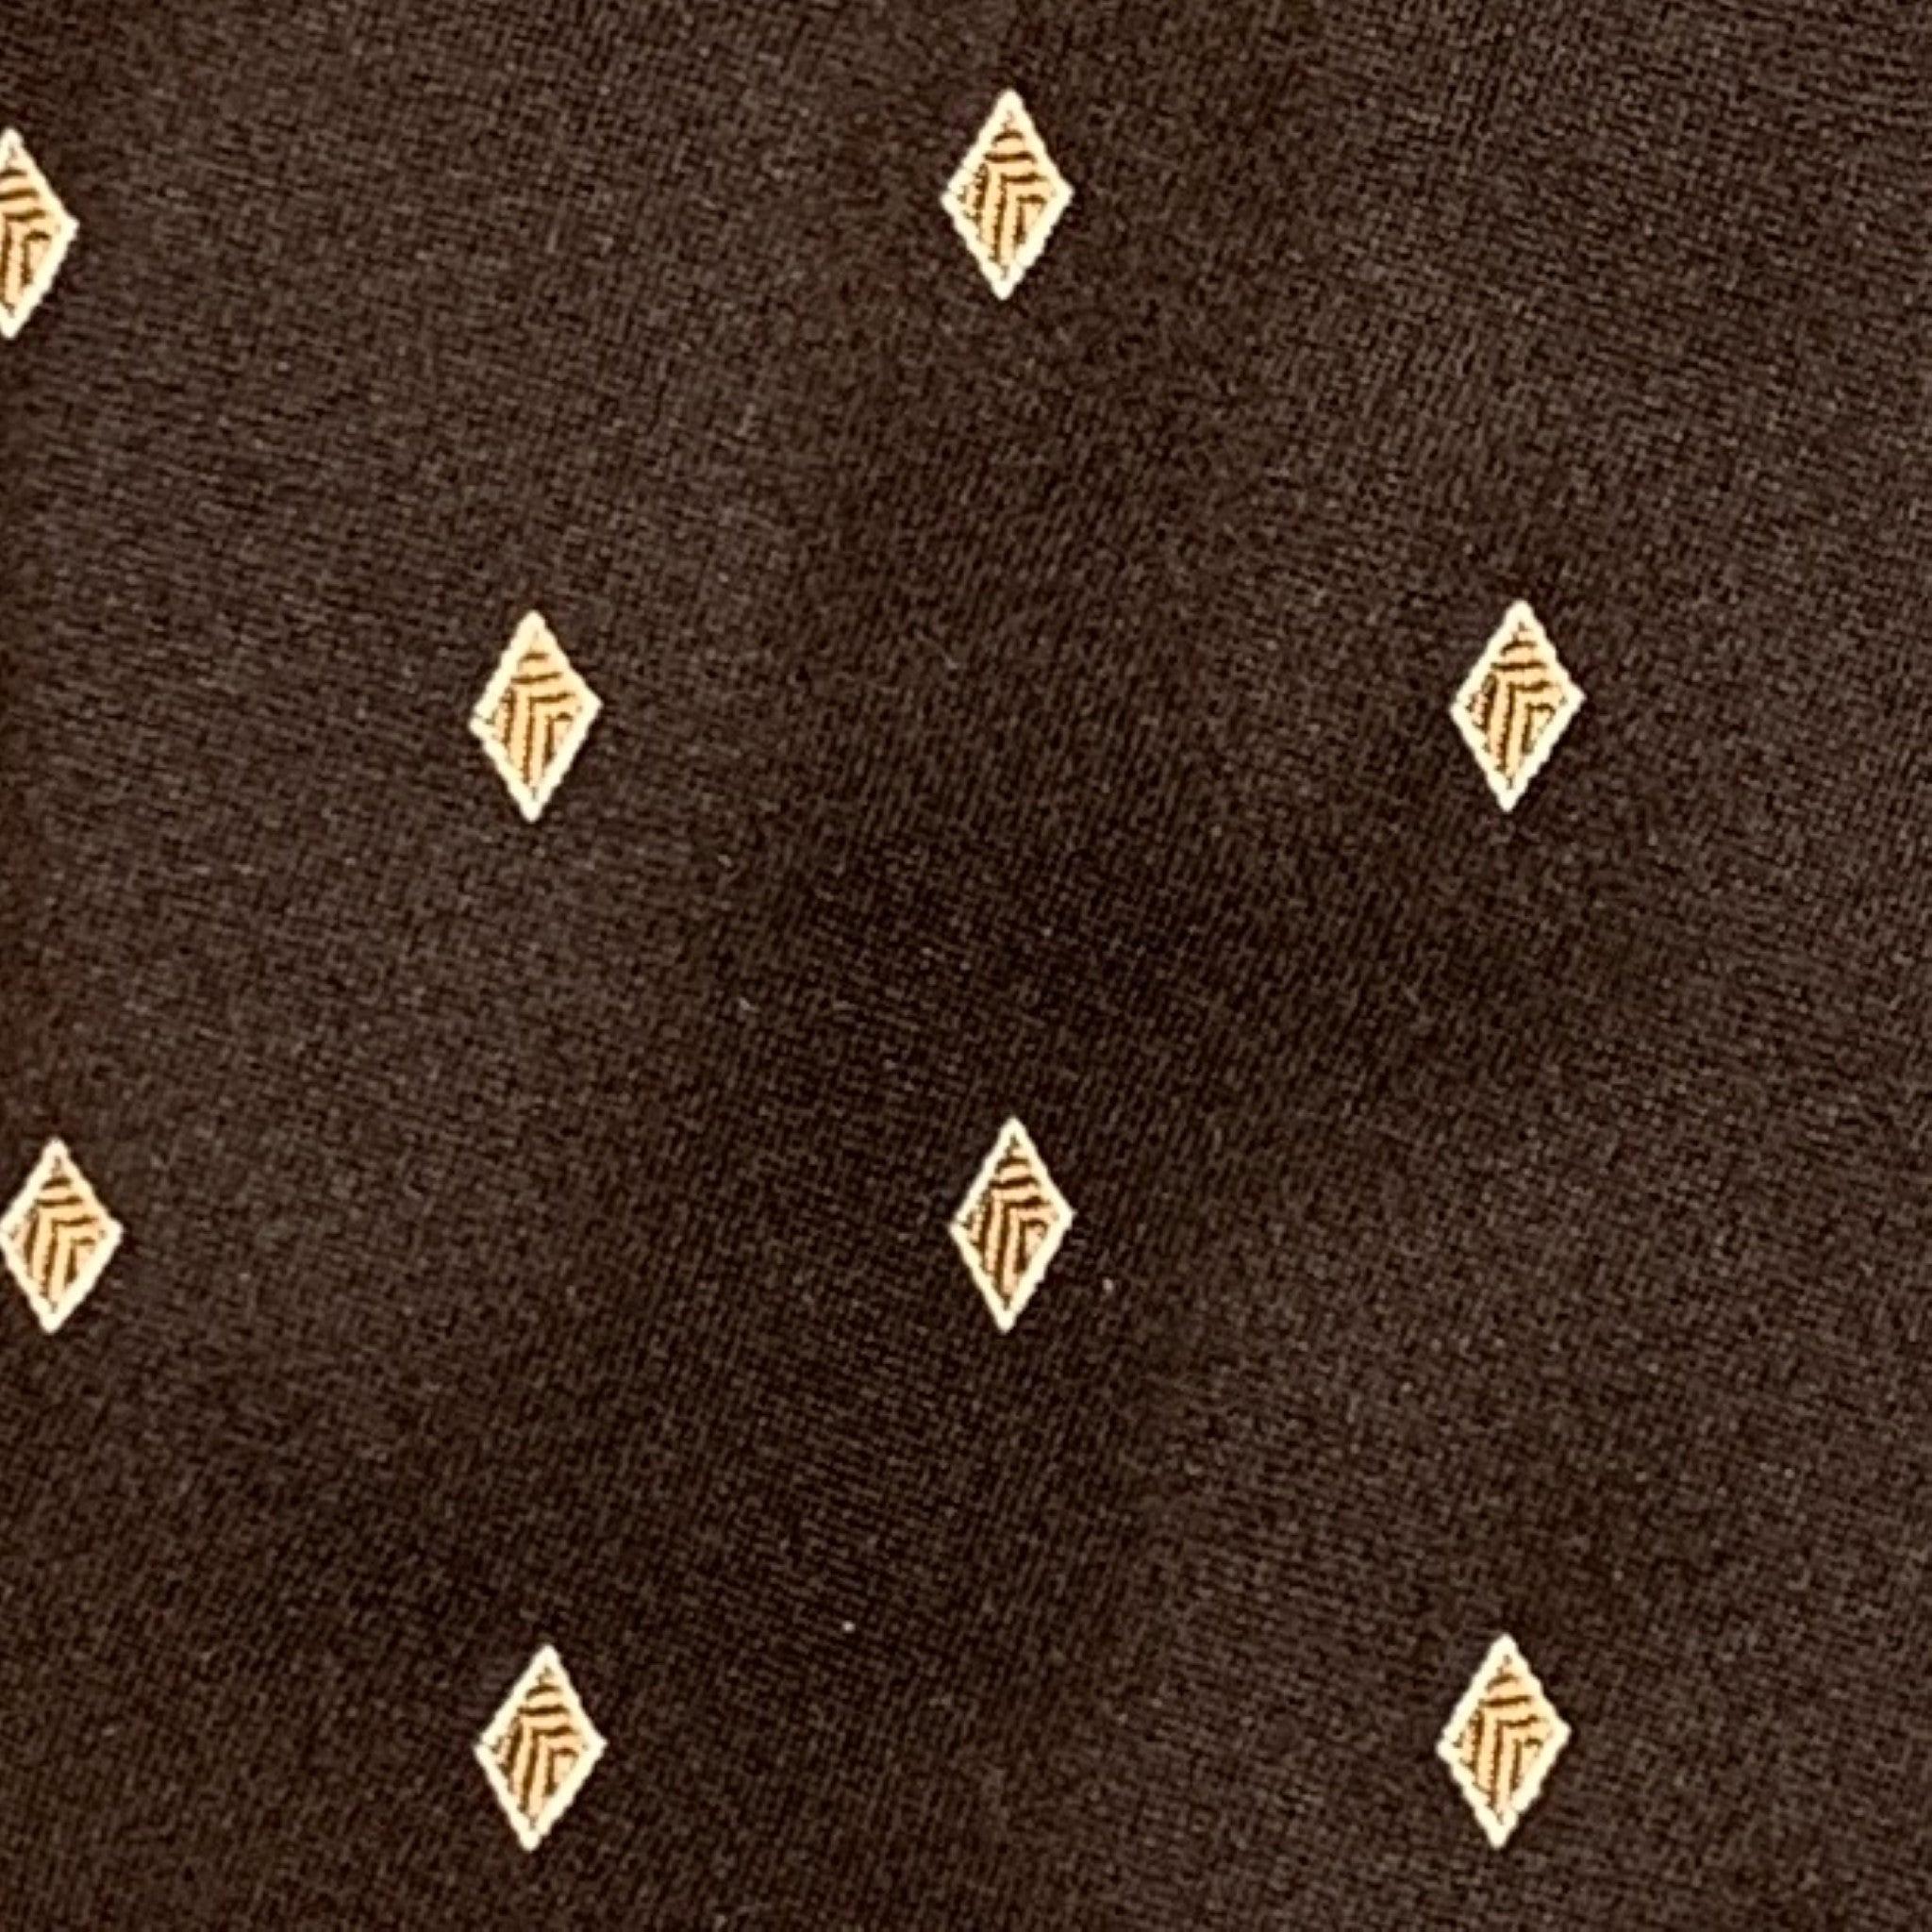 YVES SAINT LAURENT Brown Yellow Diamond Silk Jacquard Tie In Excellent Condition For Sale In San Francisco, CA